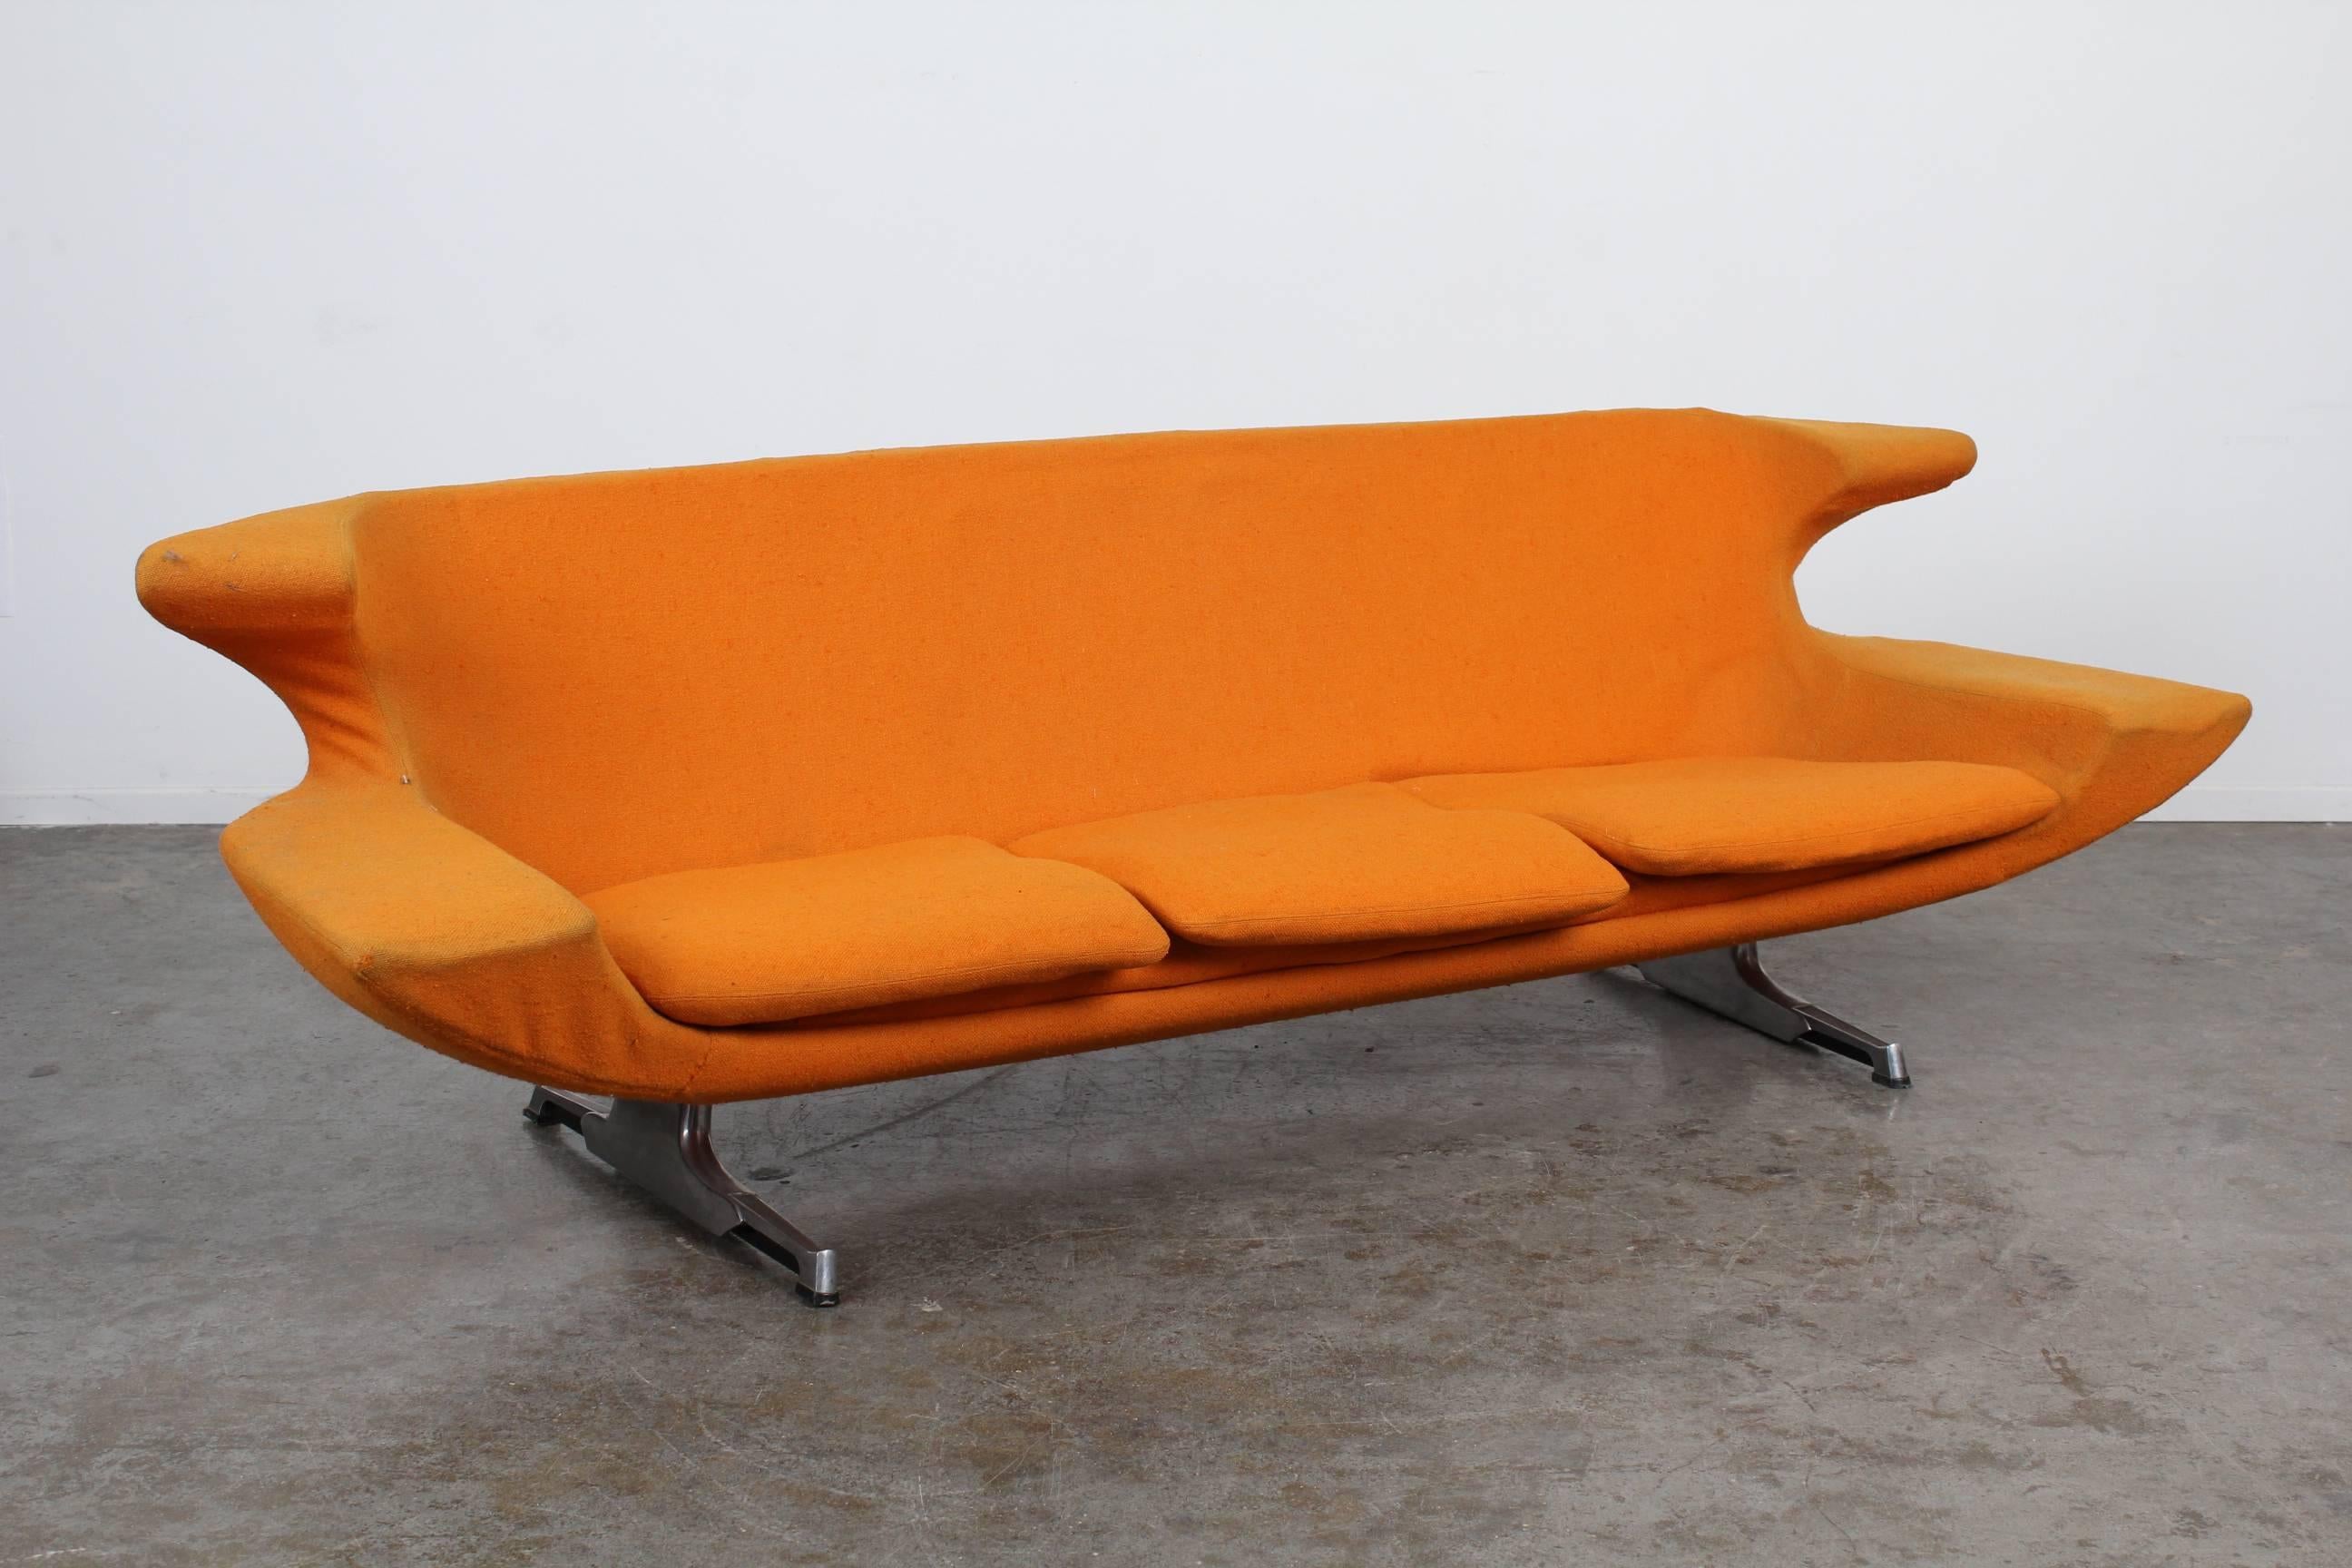 Rare and collected Swedish Mid-Century Modern wingback sofa by Hans-Erik Johansson for Westbergs Möbler, Tranås, Sweden. Shown in original fabric, will need to be reupholstered. Imported recently from Sweden.